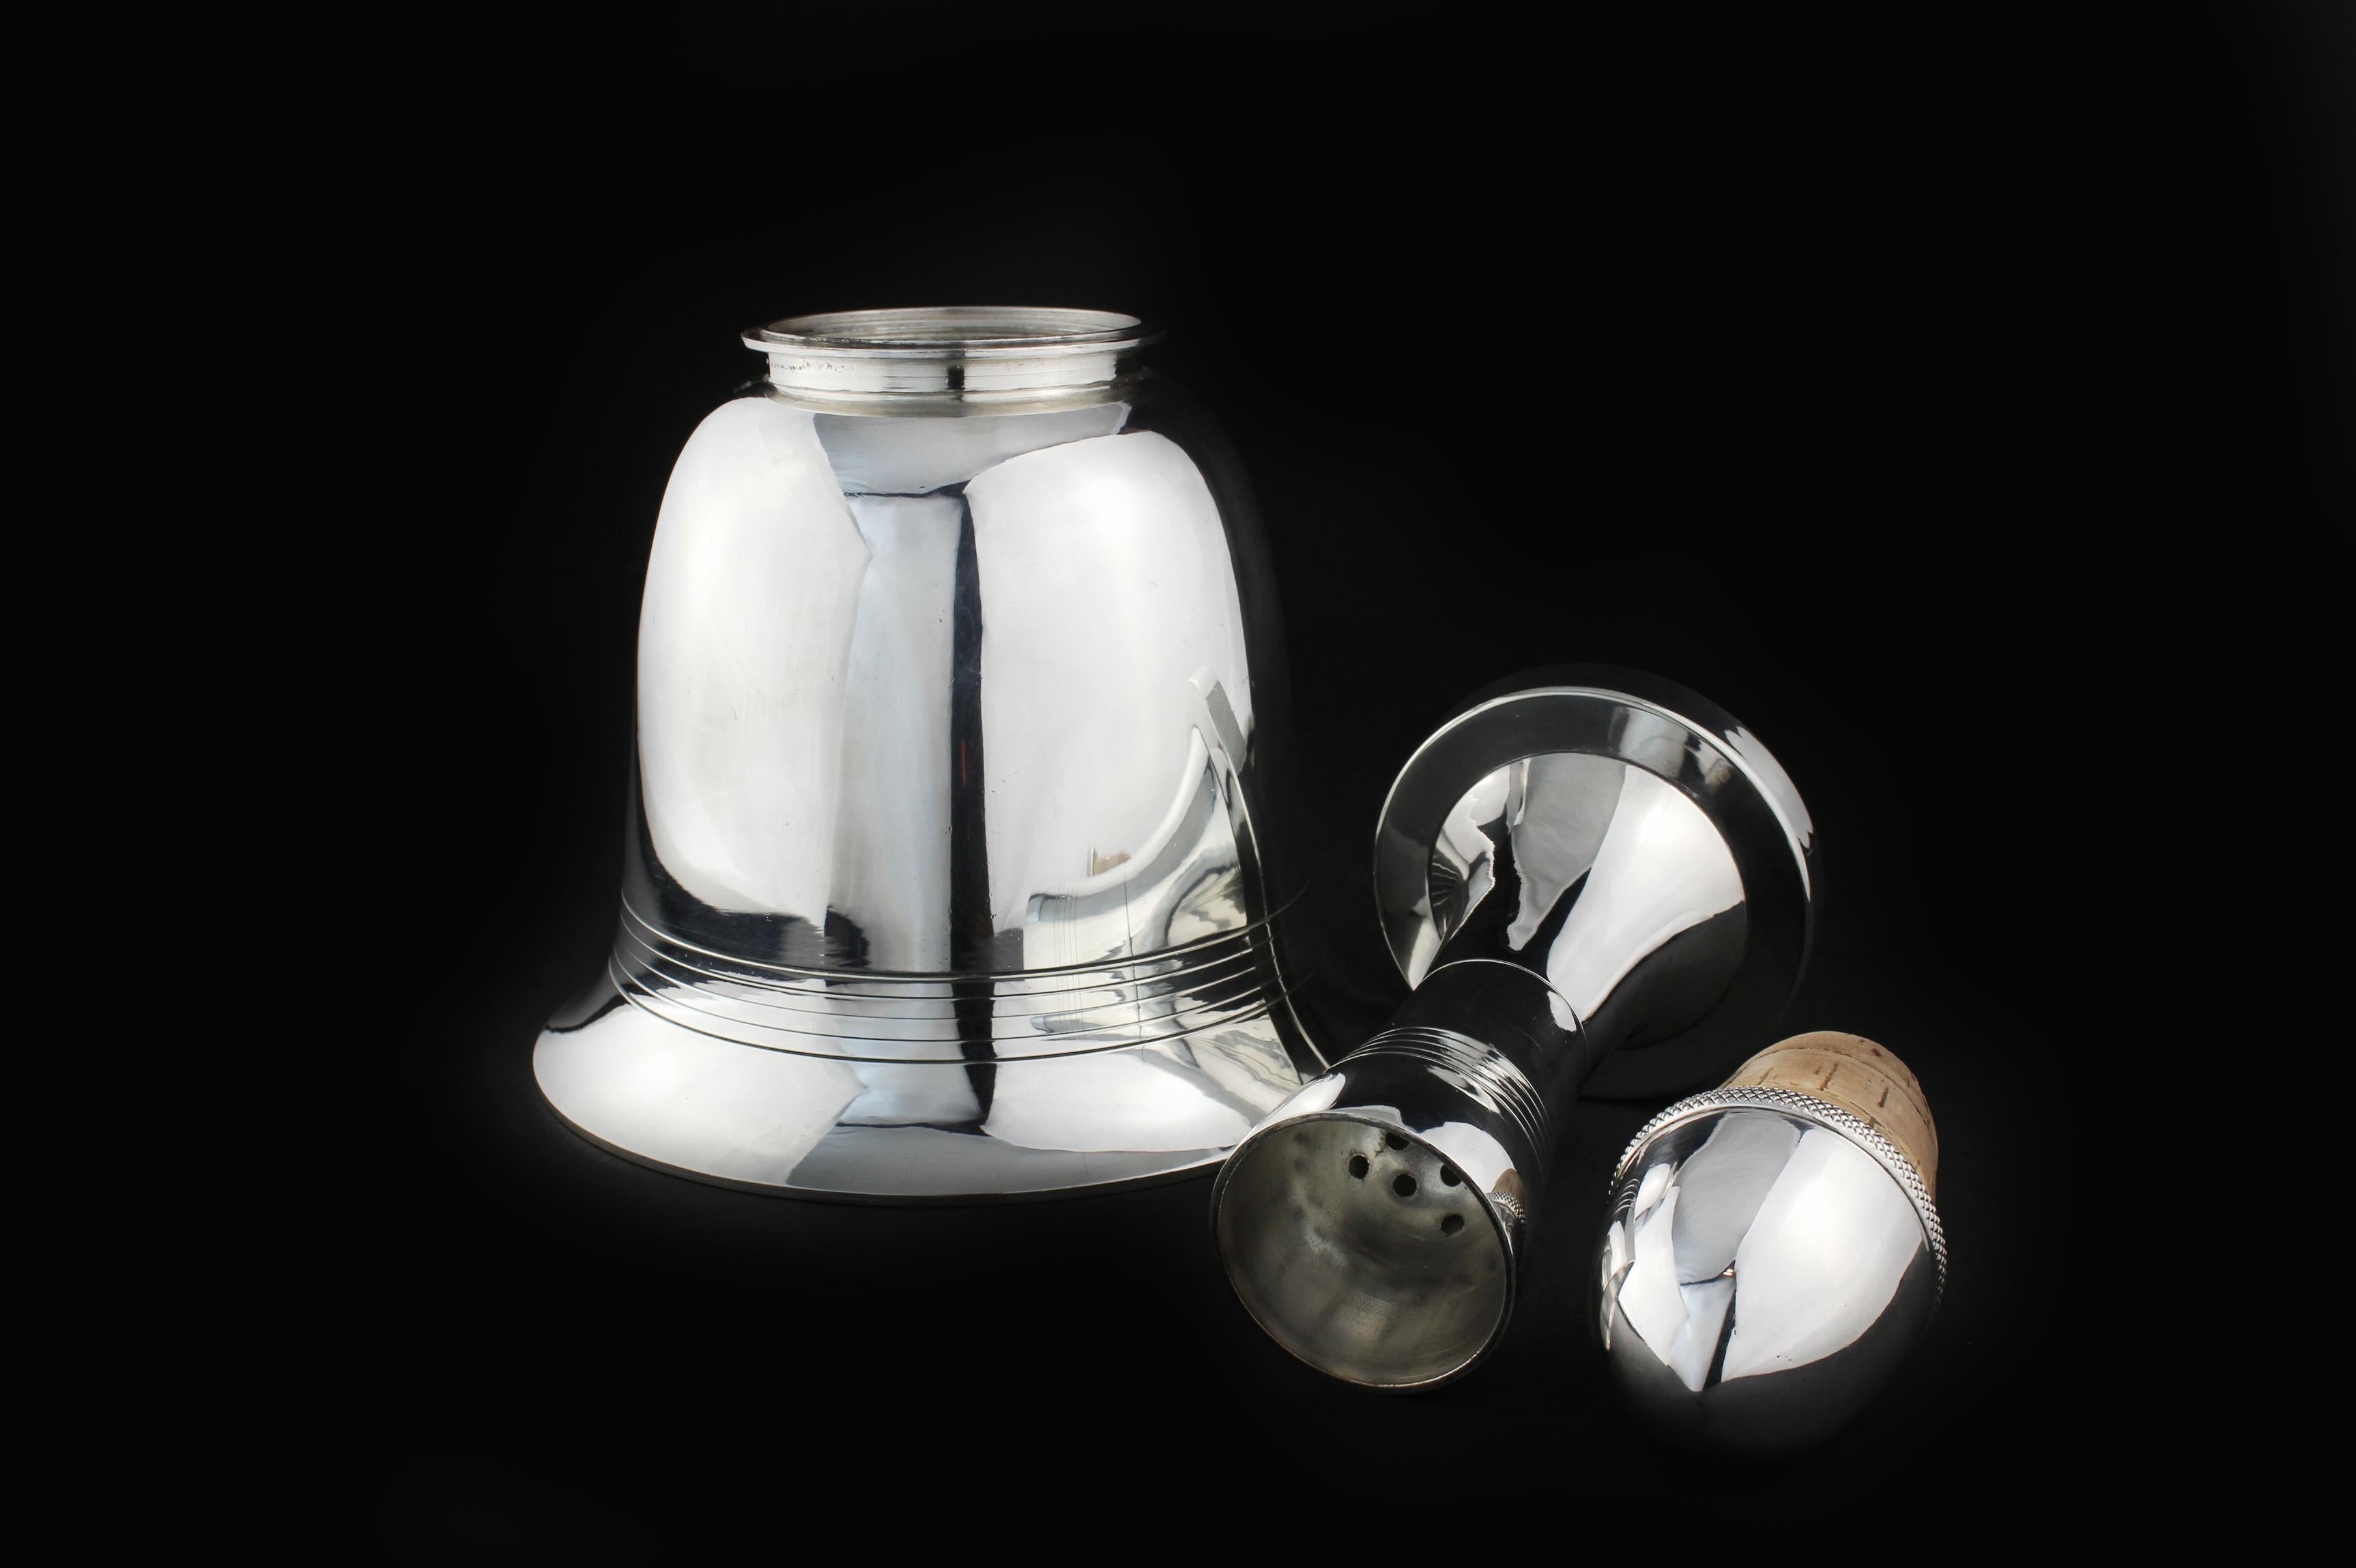 Vintage Asprey & Co silver-plated 'Bell' cocktail shaker.
Made in England, circa 1940.


Size: Height is 27.5 cm
Weight: 730 grams total

Condition: Cocktail shaker has some wear from general usage, good overall condition, has no damage,